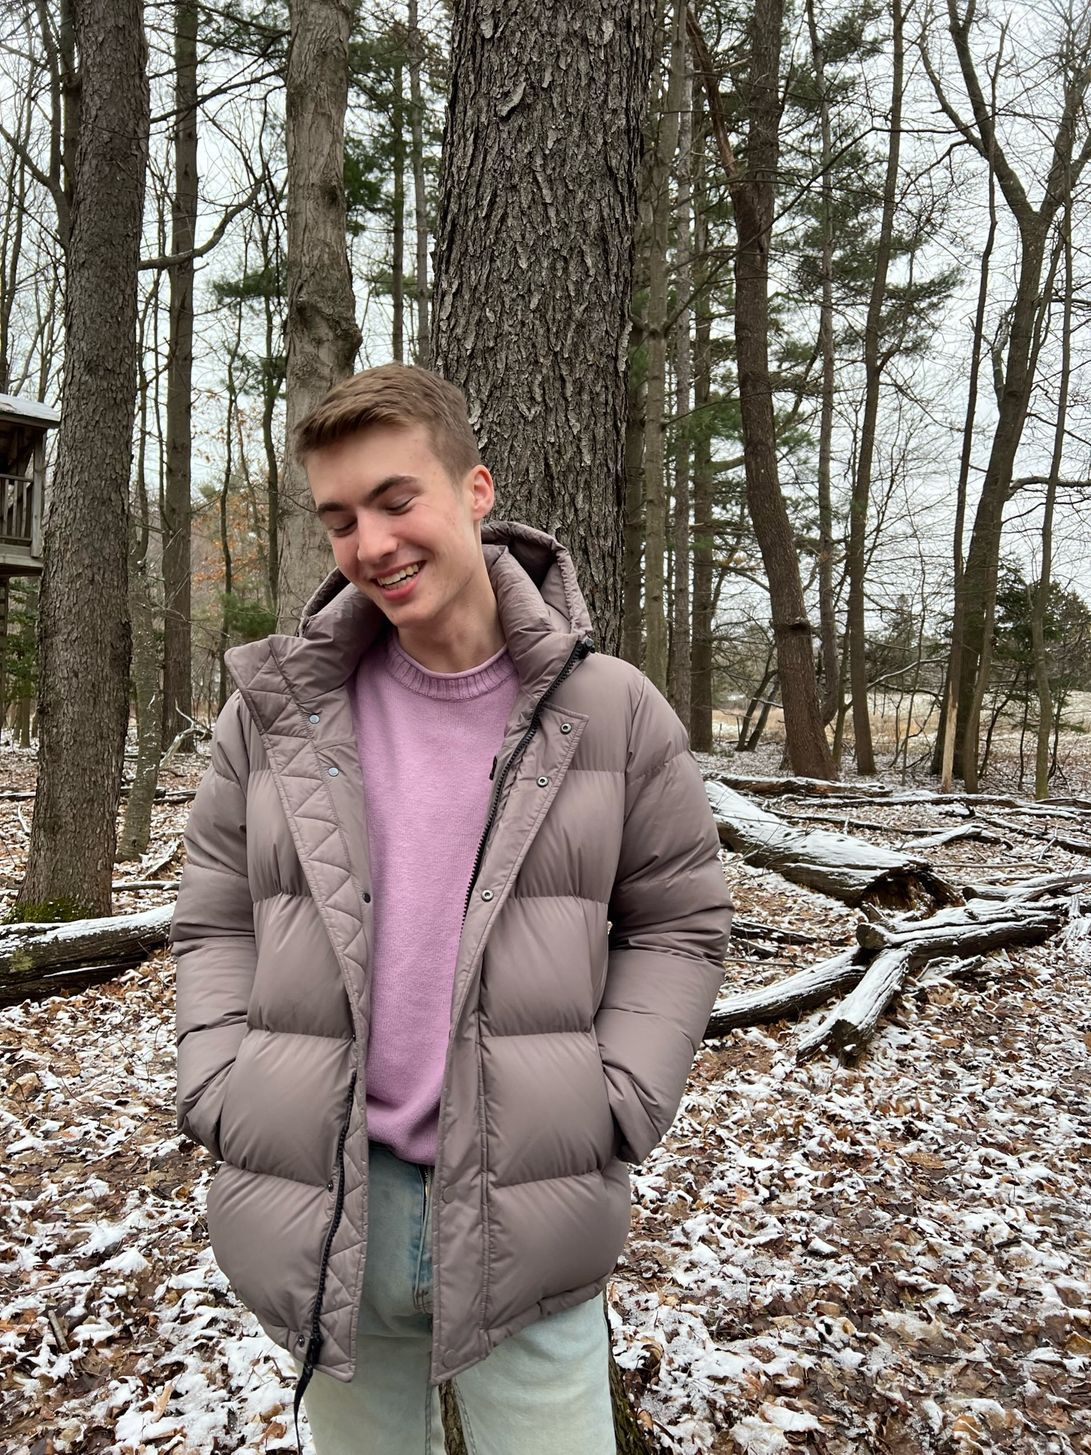 Me in a winter coat in front of a tree